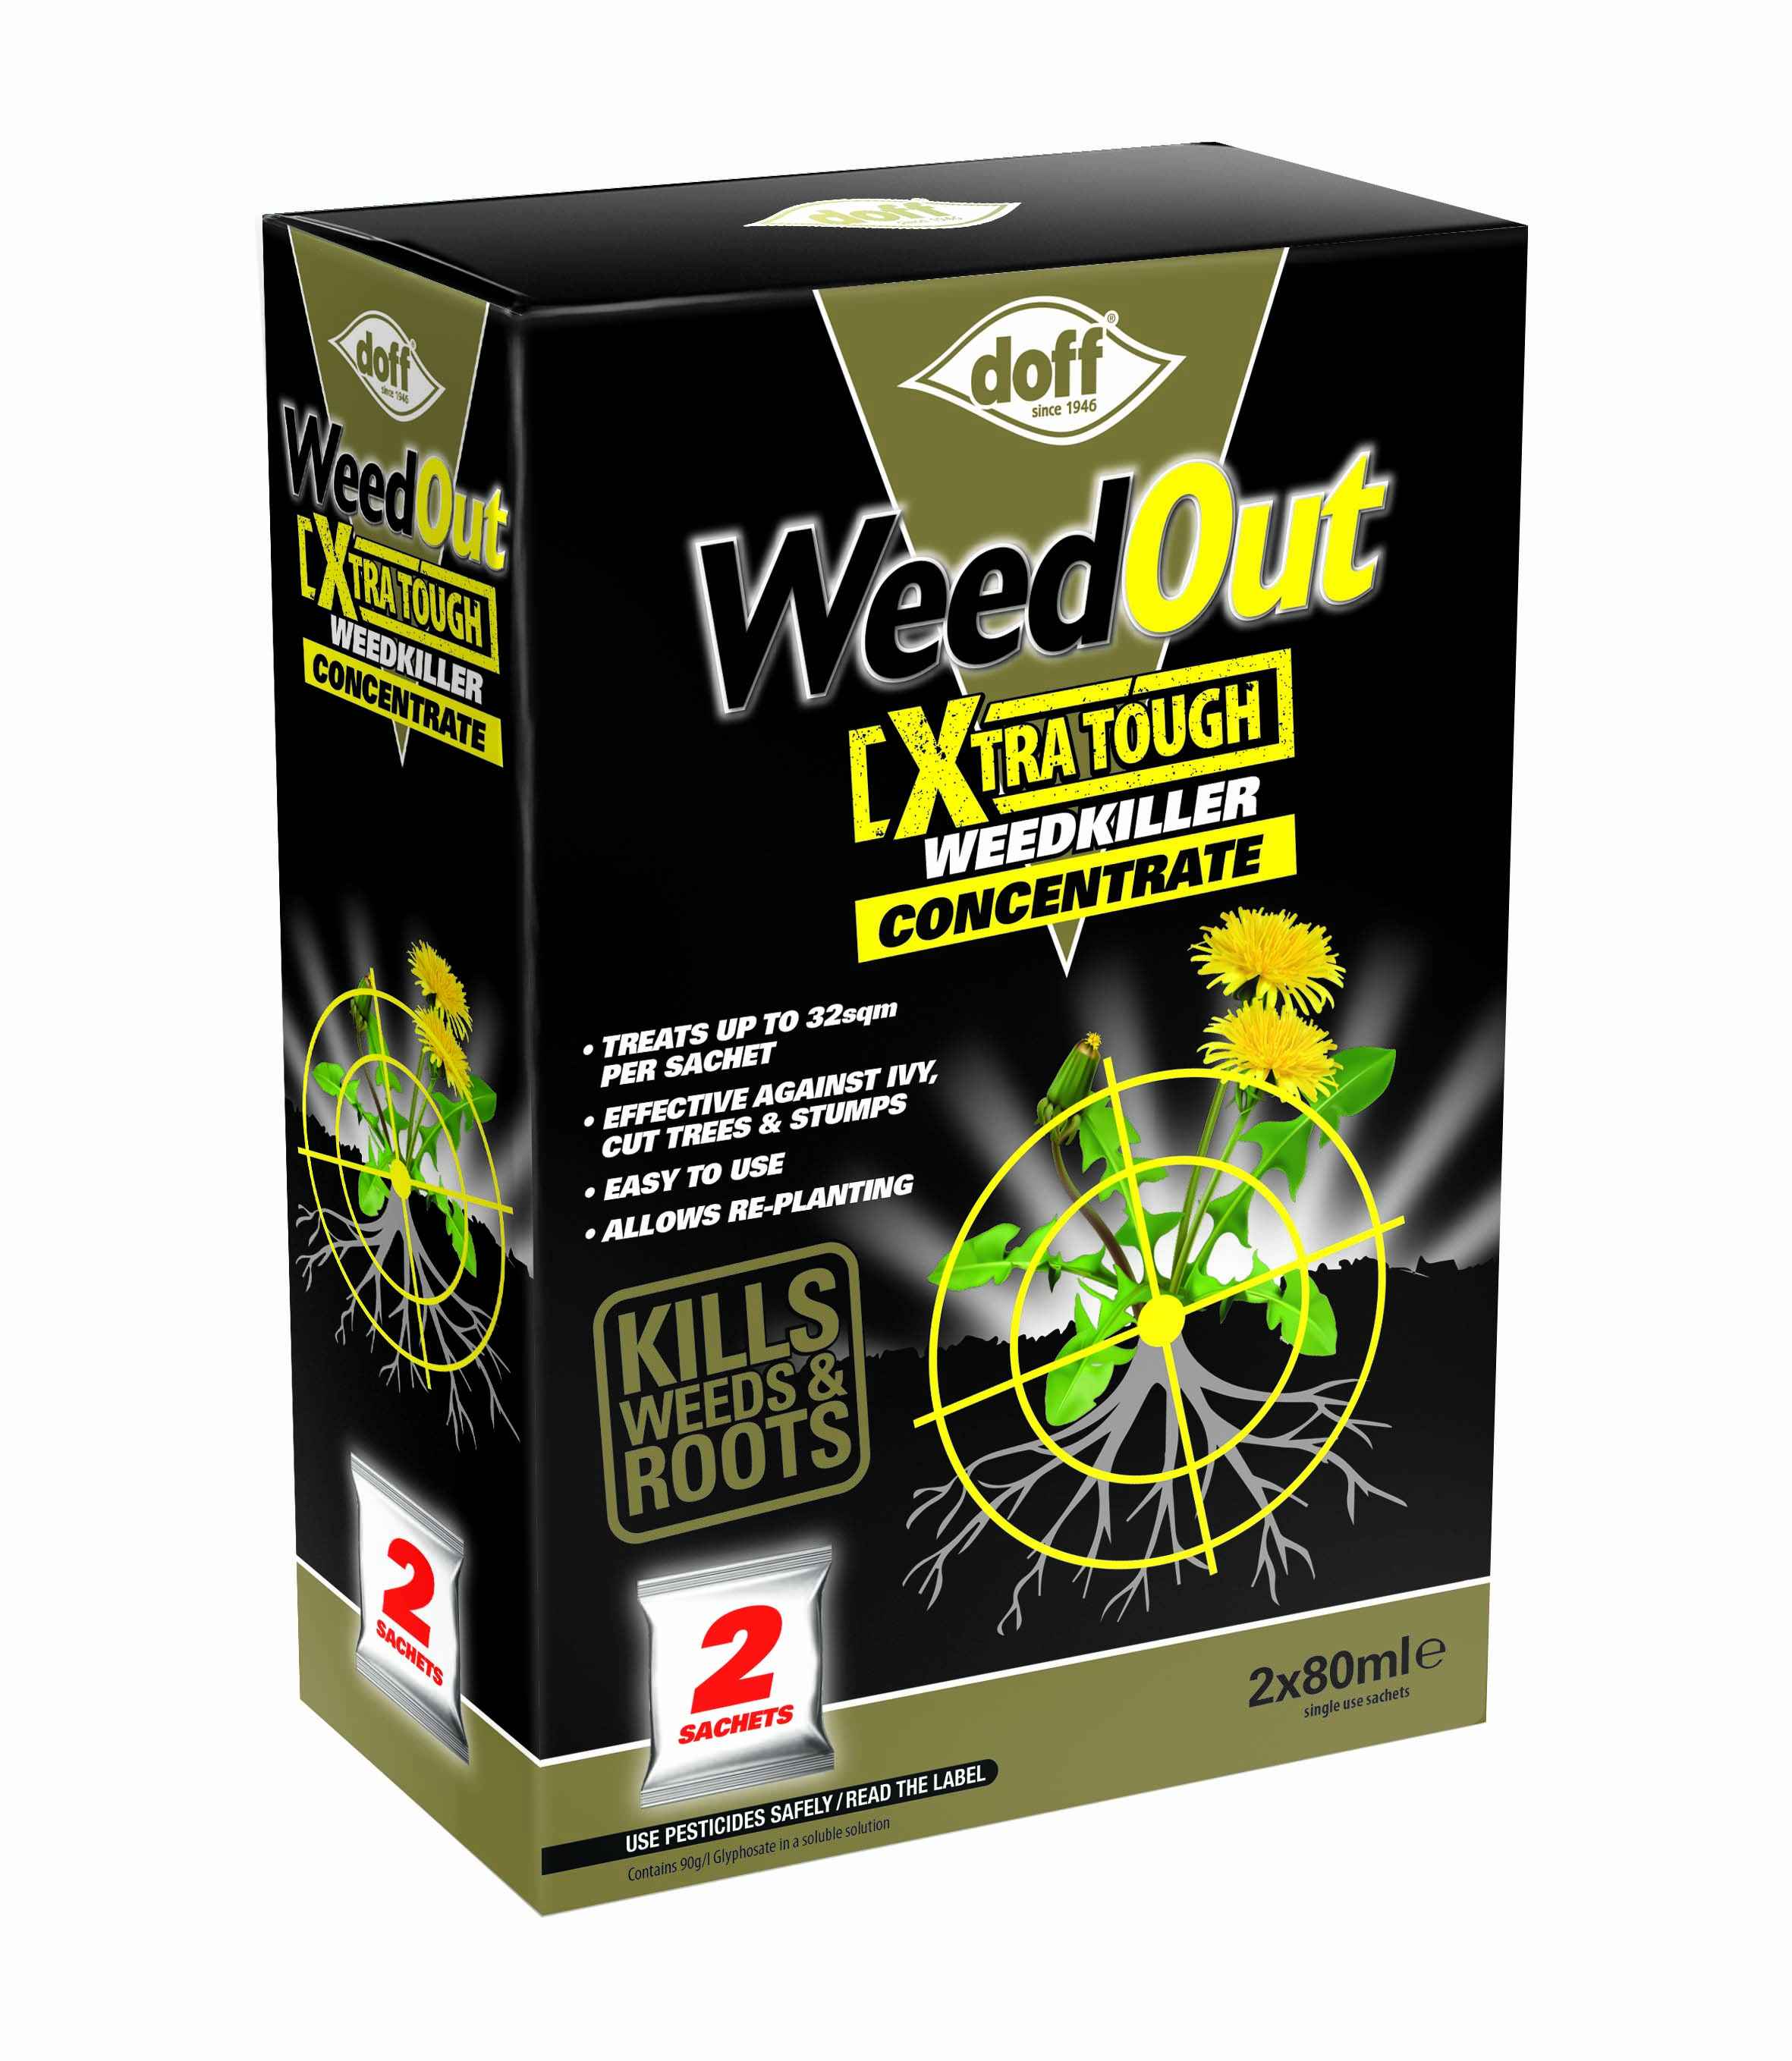 Doff WeedOut Extra Tough Concentrated Weedkiller - 2 Sachet(F-FC-002-DOF)